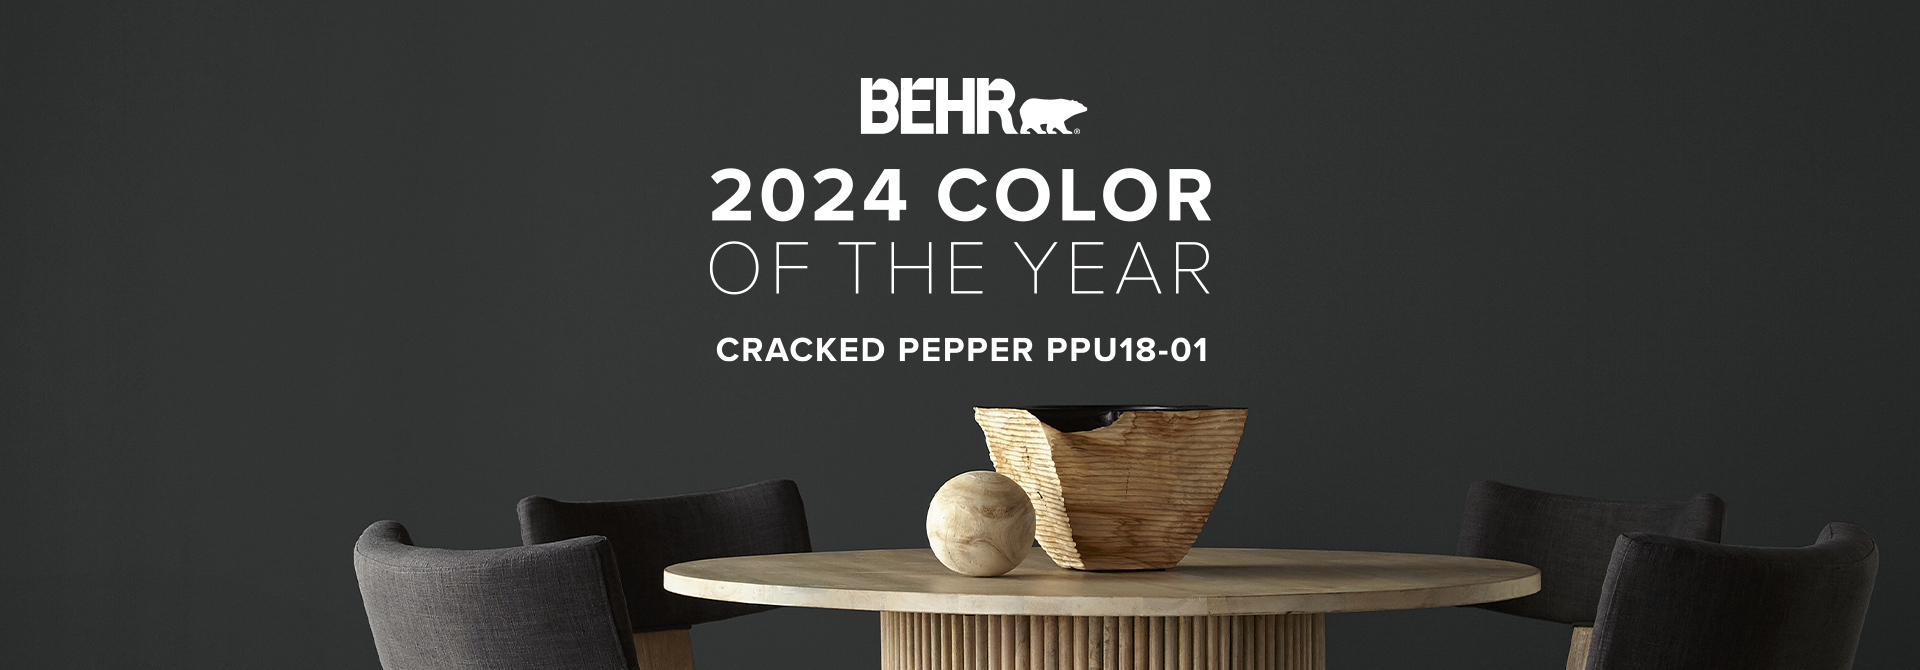 Dining room painted in Cracked Pepper, featuring Behr 2024 Color of the Year, Cracked Pepper